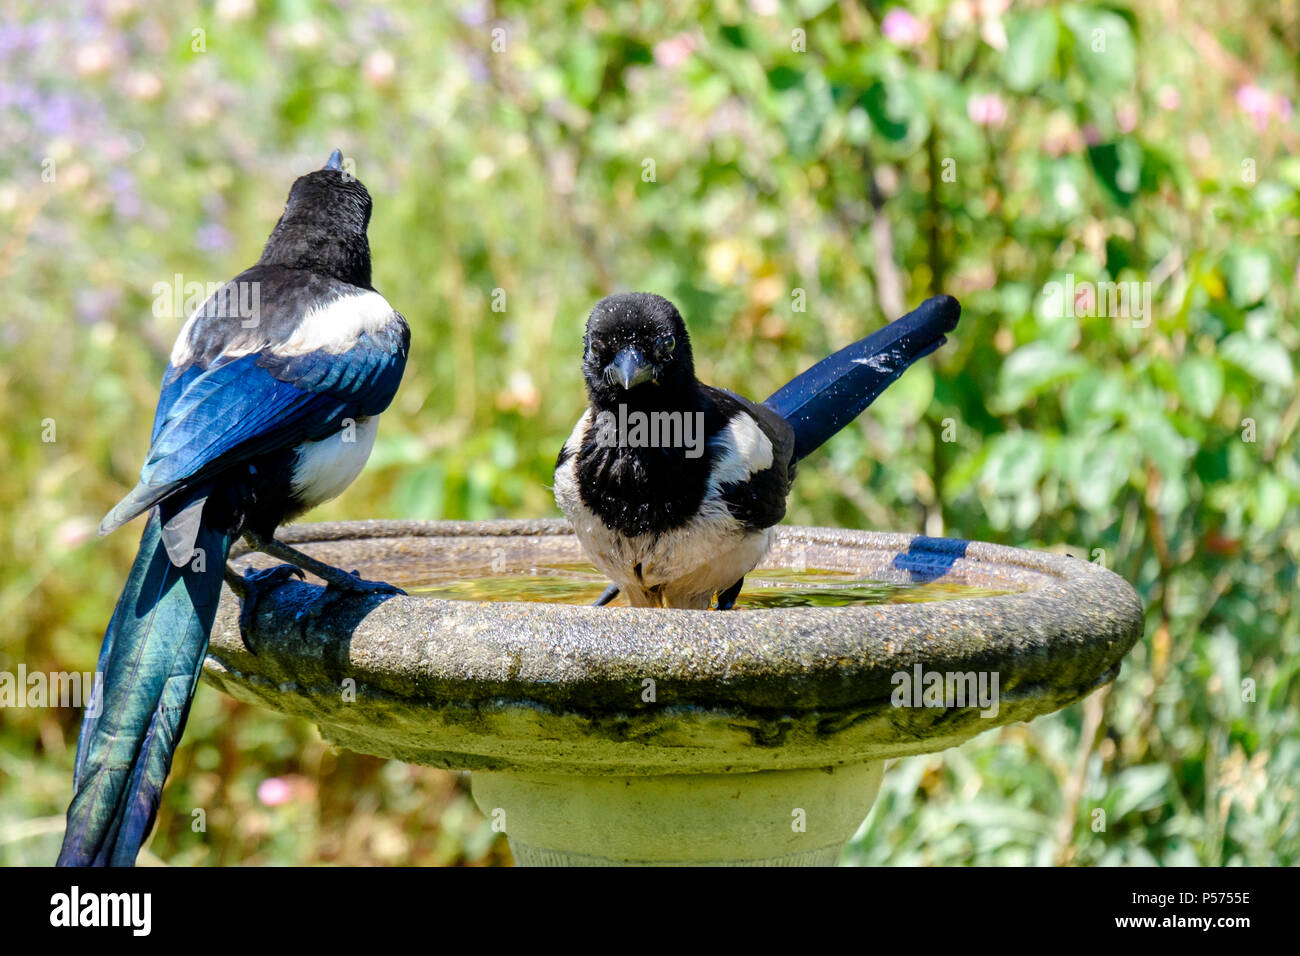 Young magpies cool off in a garden birdbath on a hot day. London UK. Stock Photo